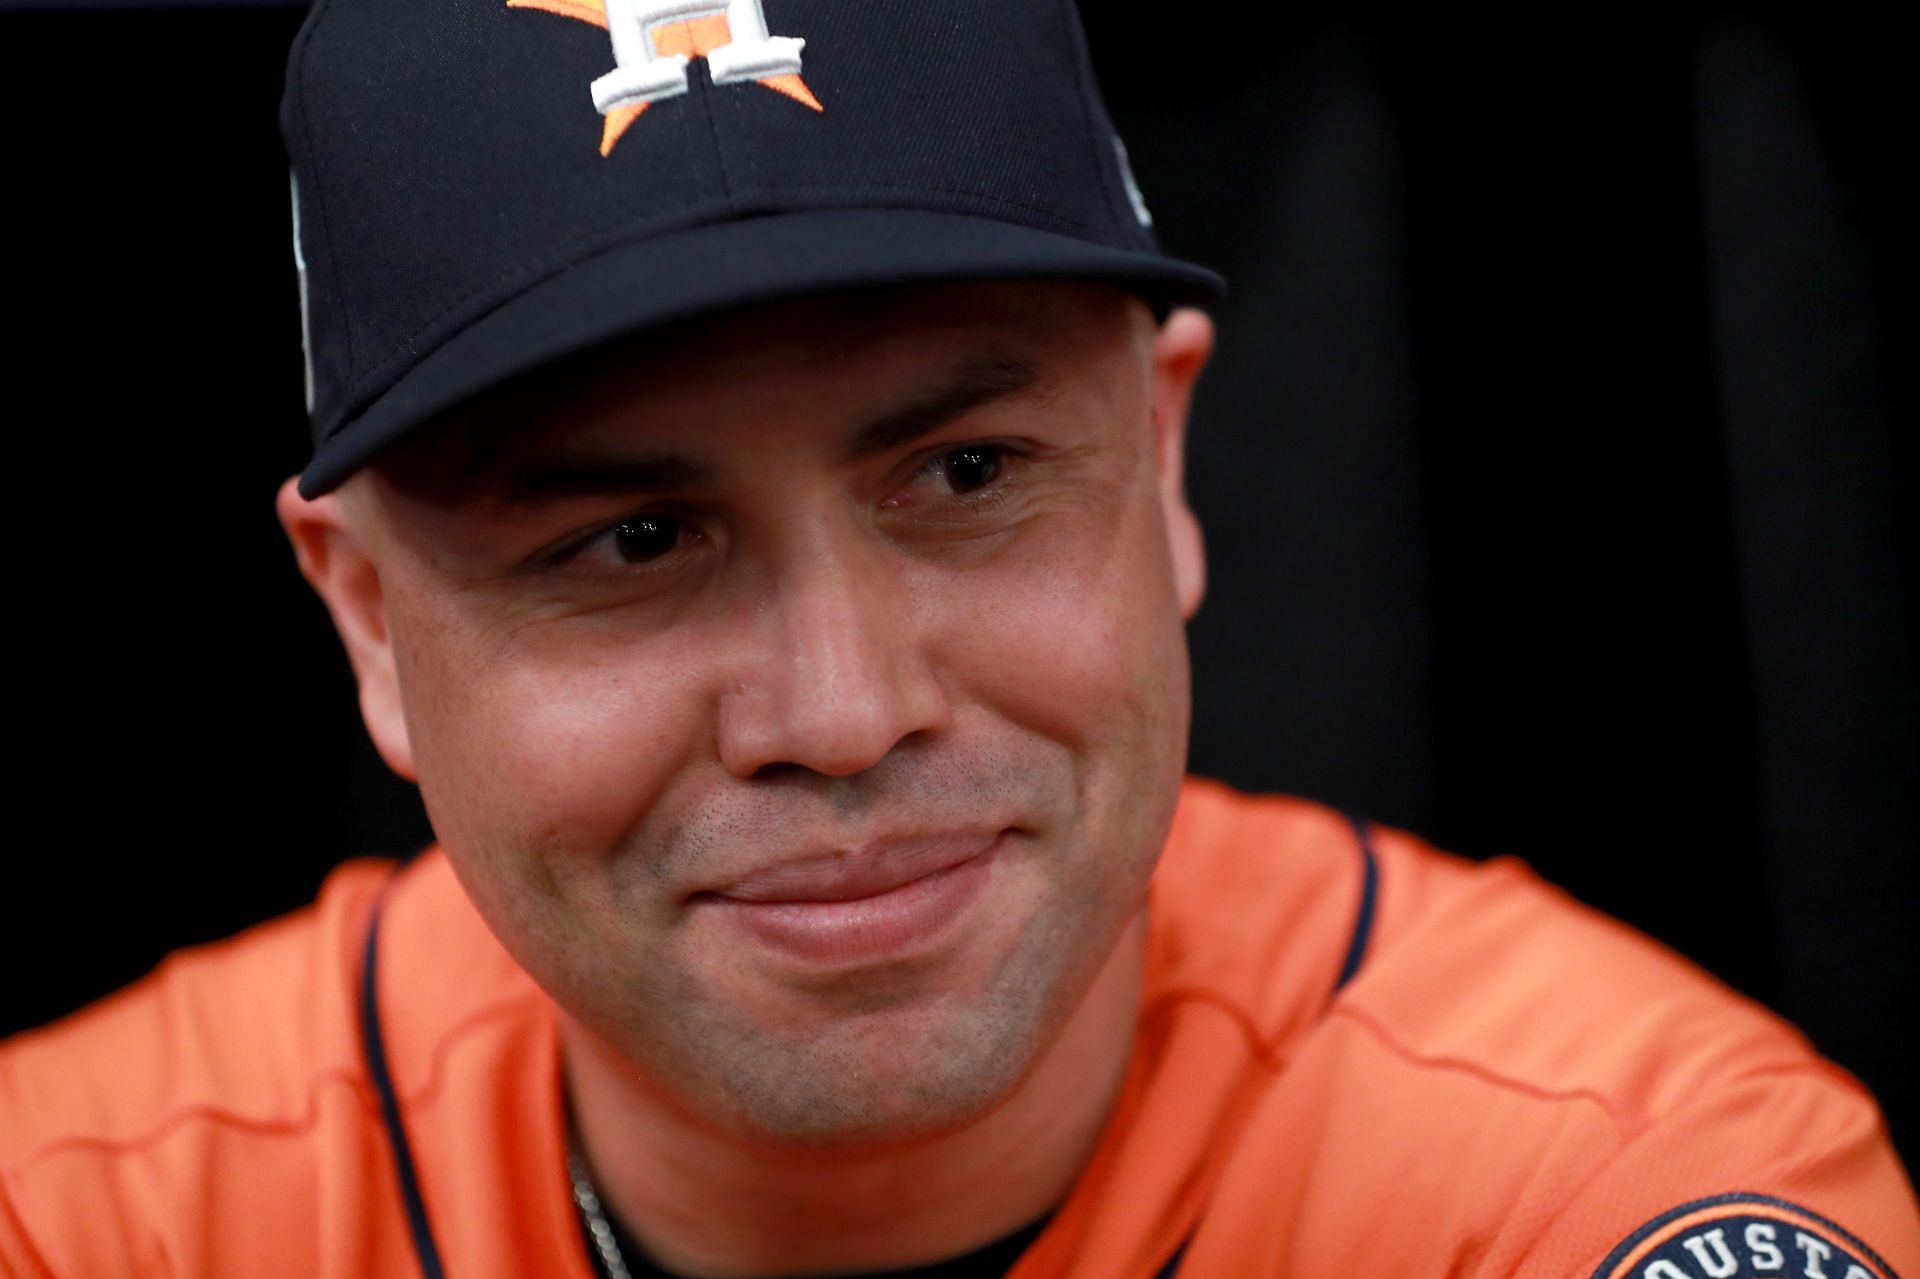 Carlos Beltran played for the Royals and Rangers